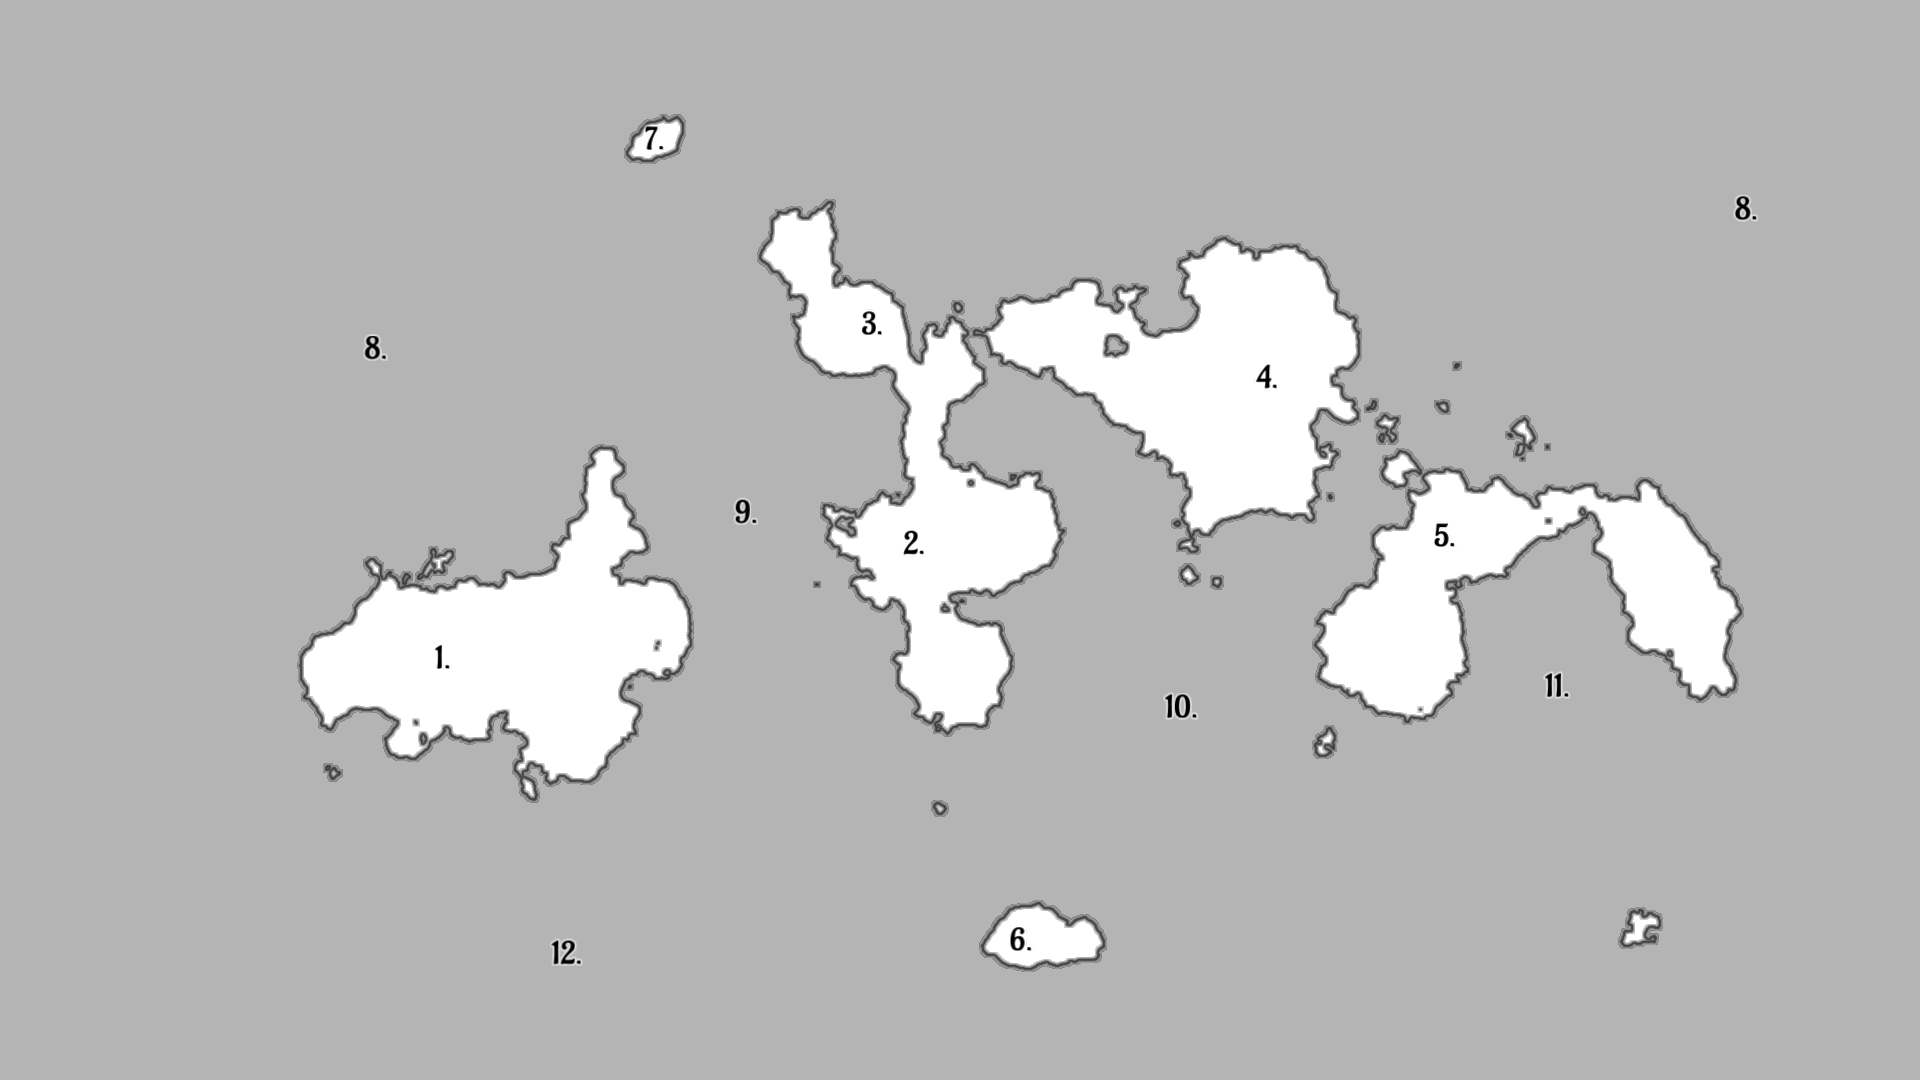 The map of Biscore.